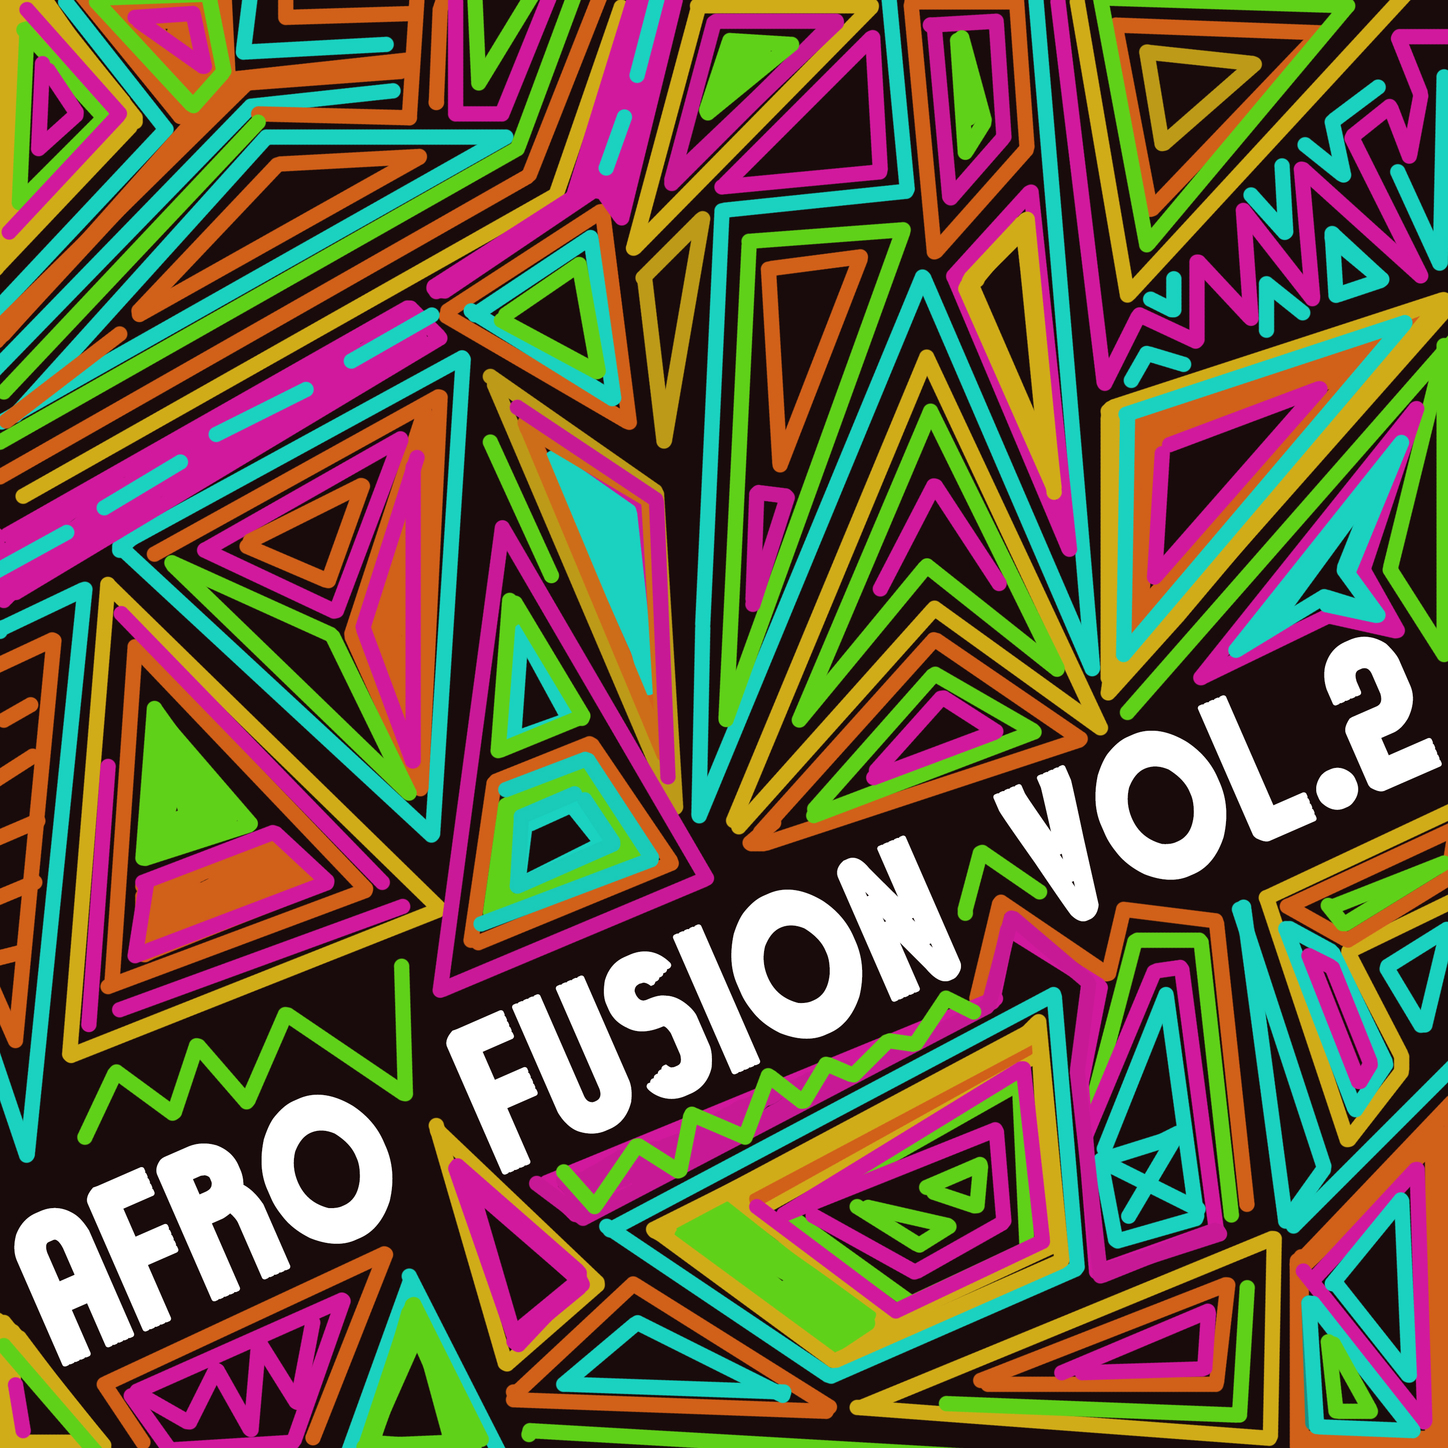 Afro Fusion Vol, 2